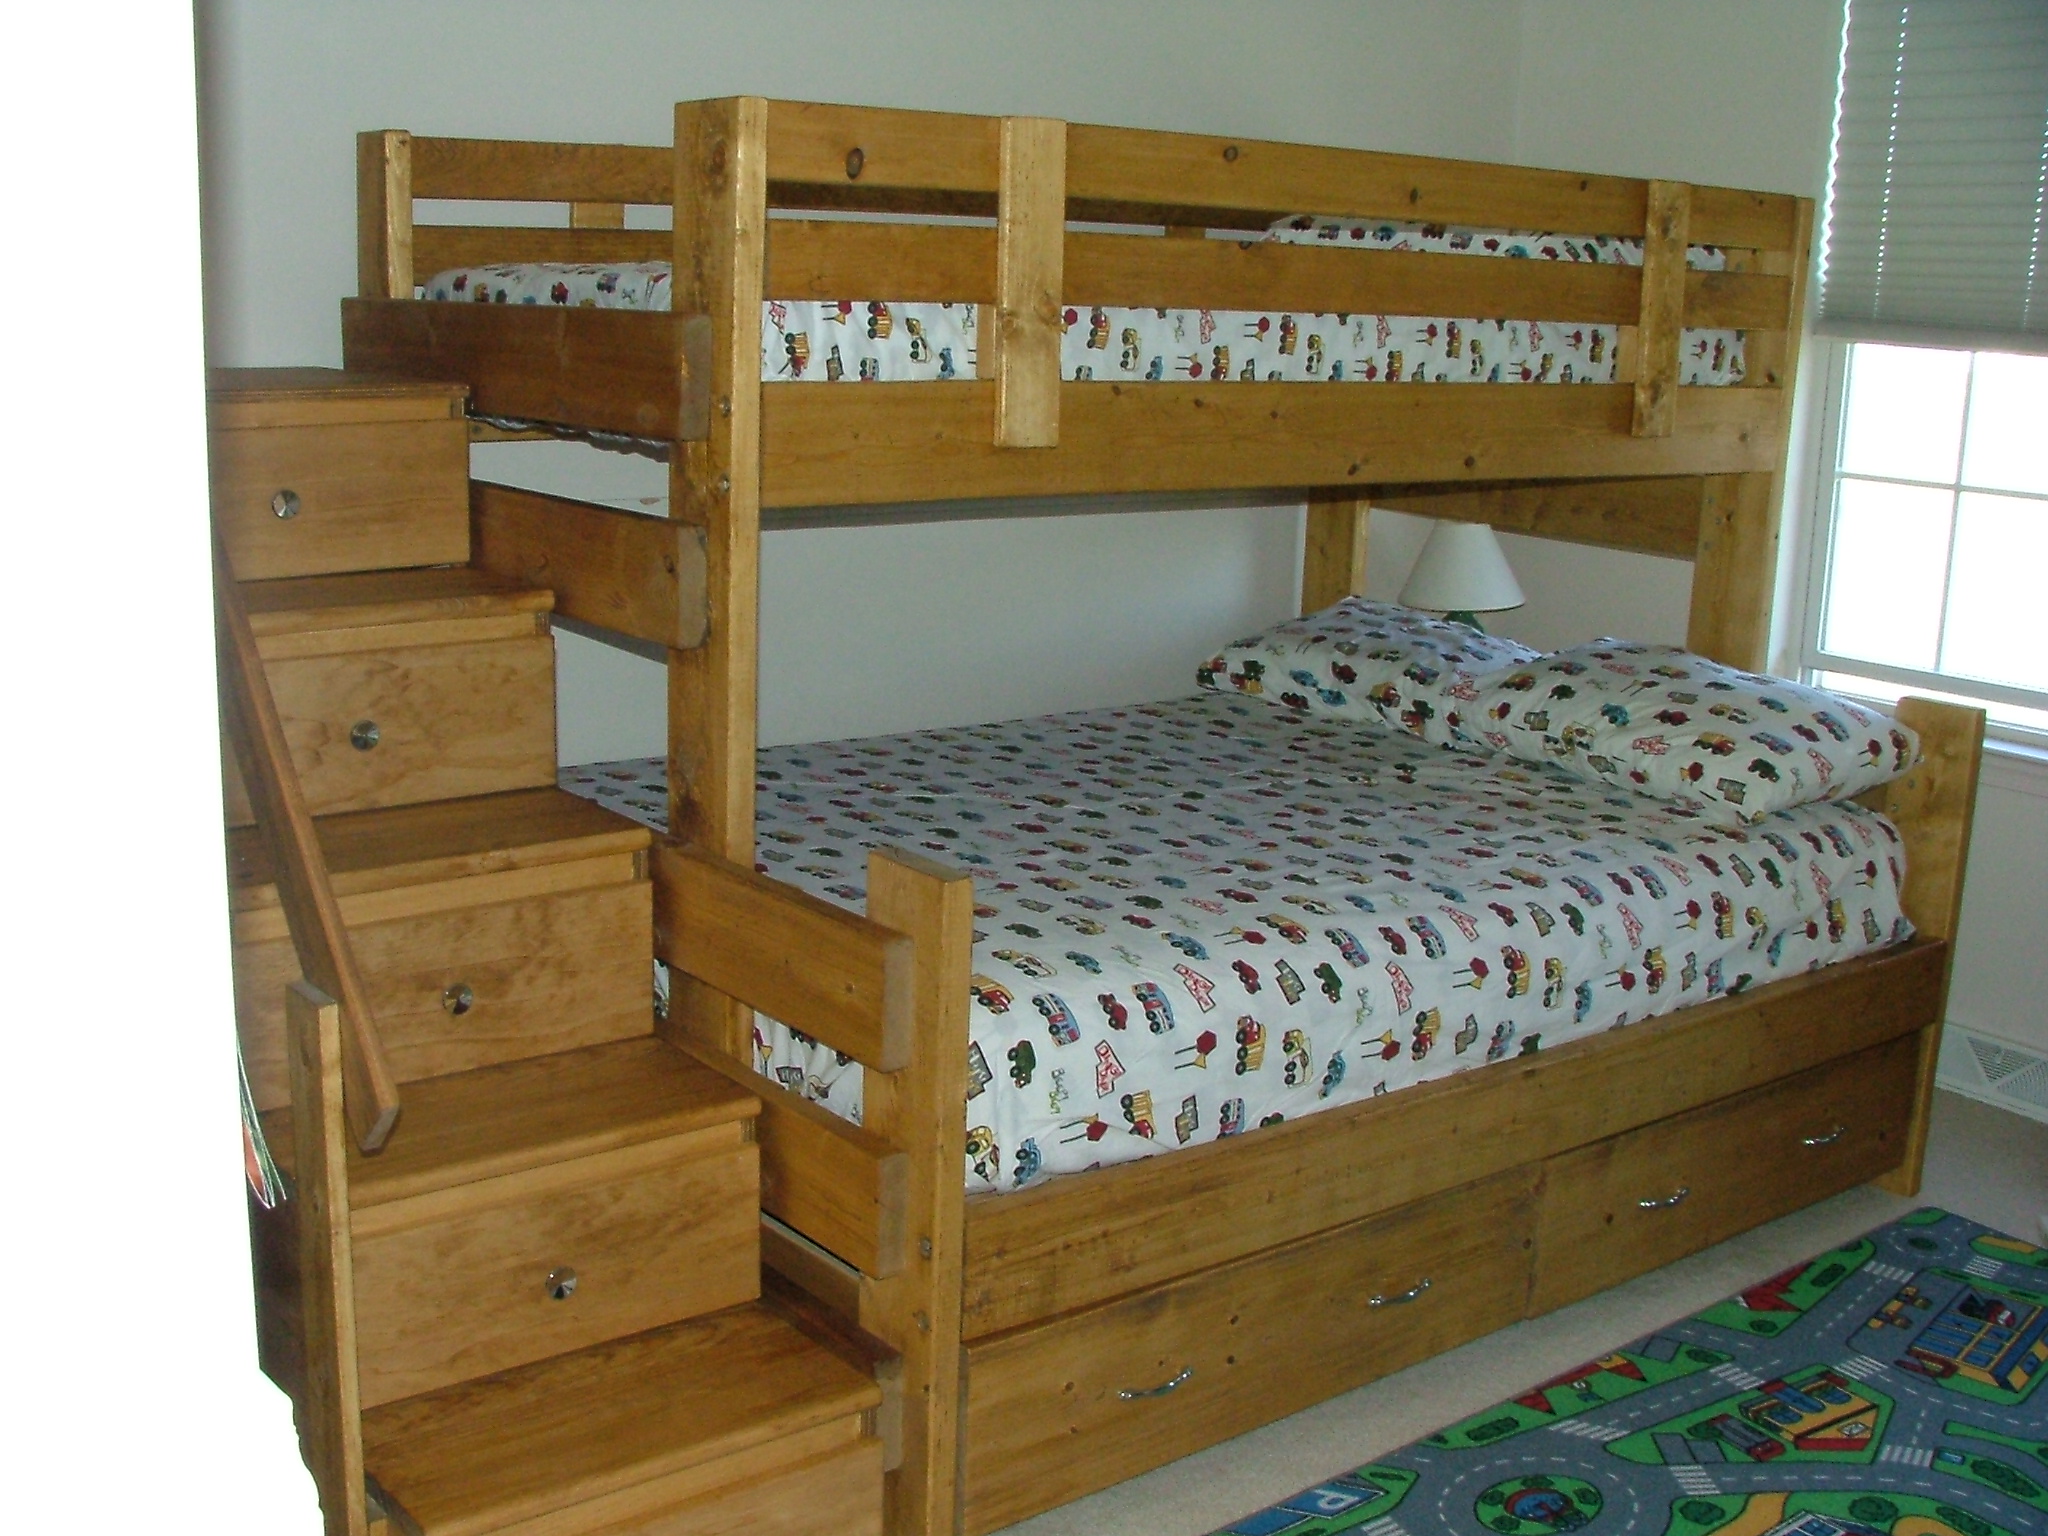 Full Bed Furniture Woodworking Plans, Full Size Bunk Bed Plans Free